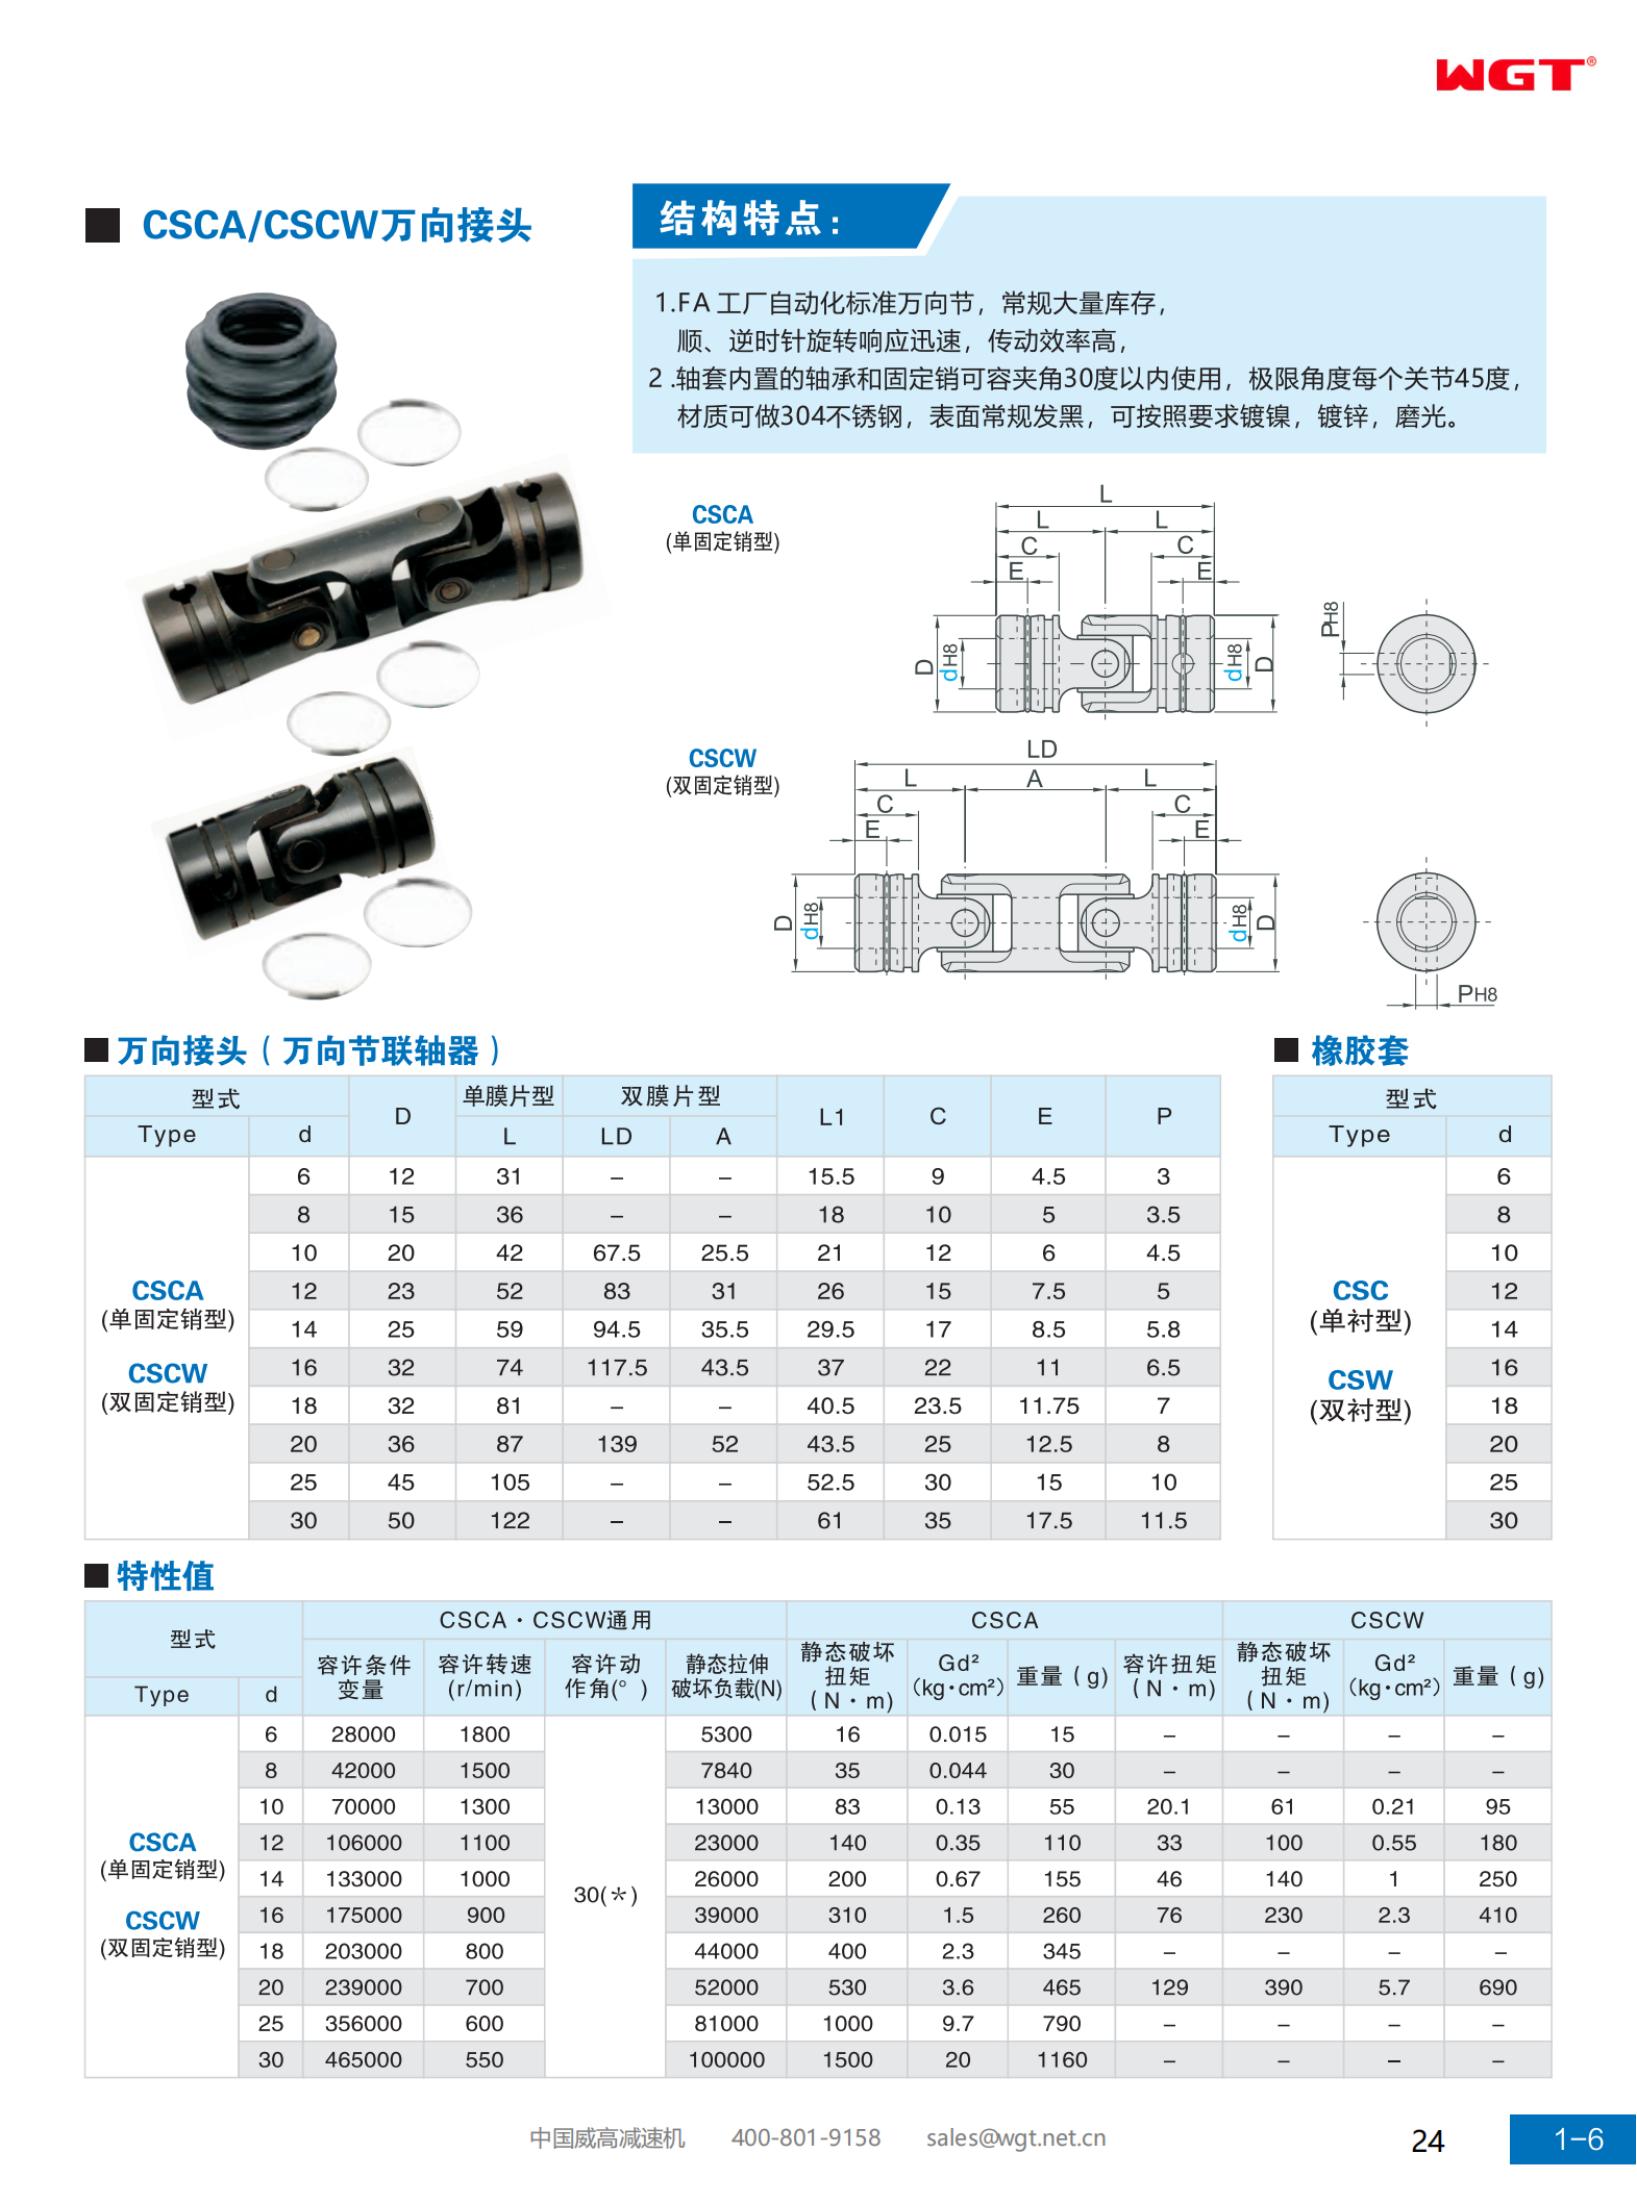 CSCA/CSCW universal joint